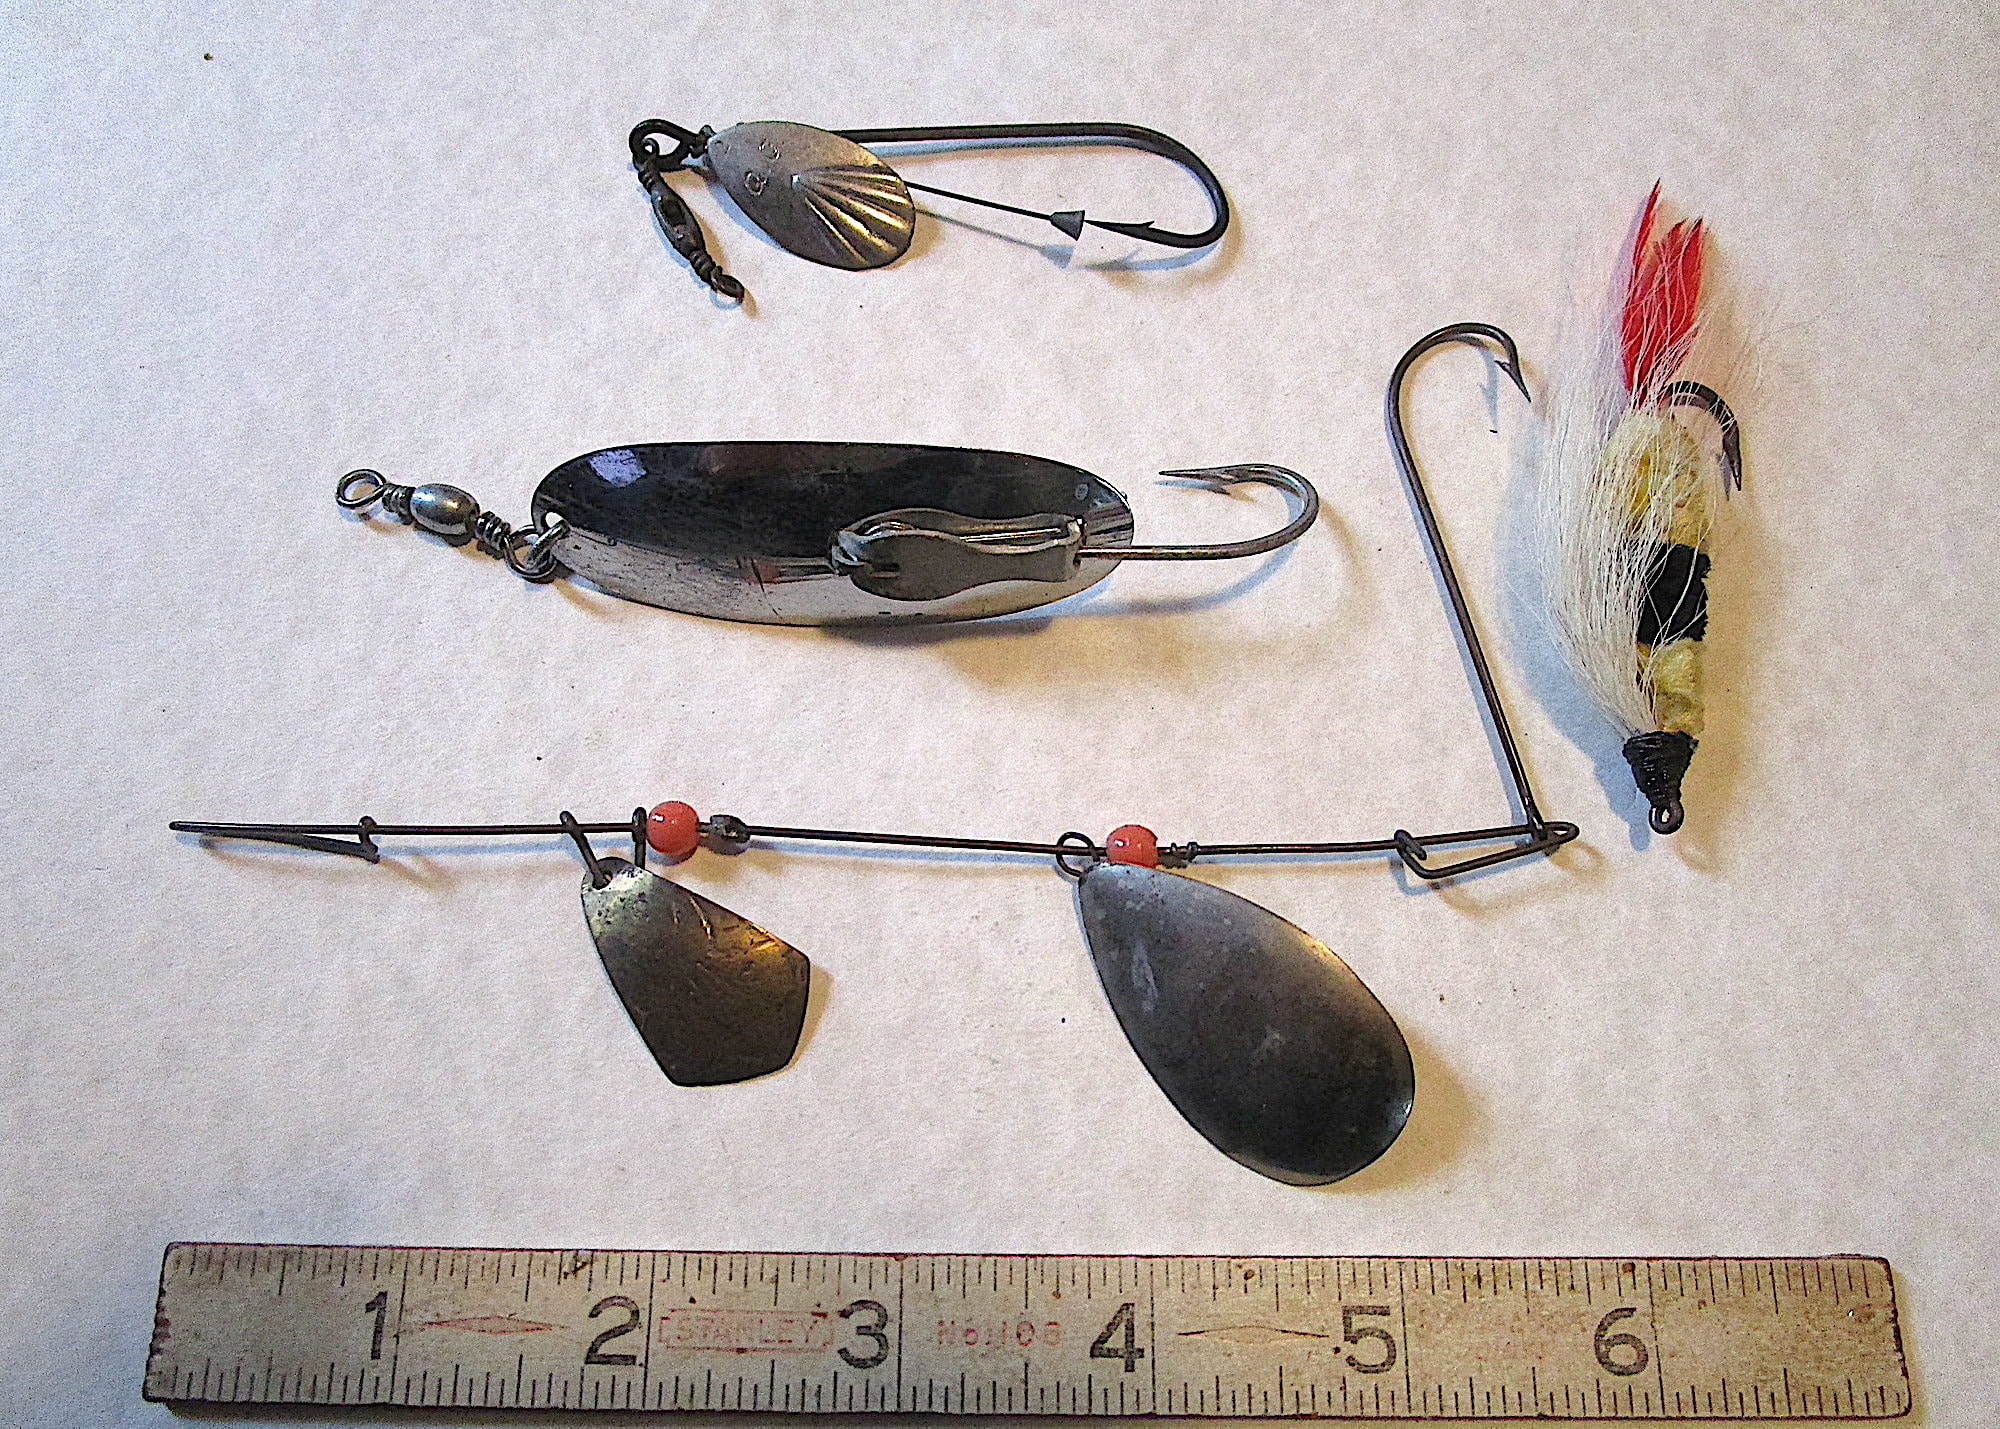 Lot of 5 Lures Spinners Etc Vintage Antique Angling Spinner Fishing Lure  From France or Switzerland Suissex Etc 1960s Price for All 5 Lures 